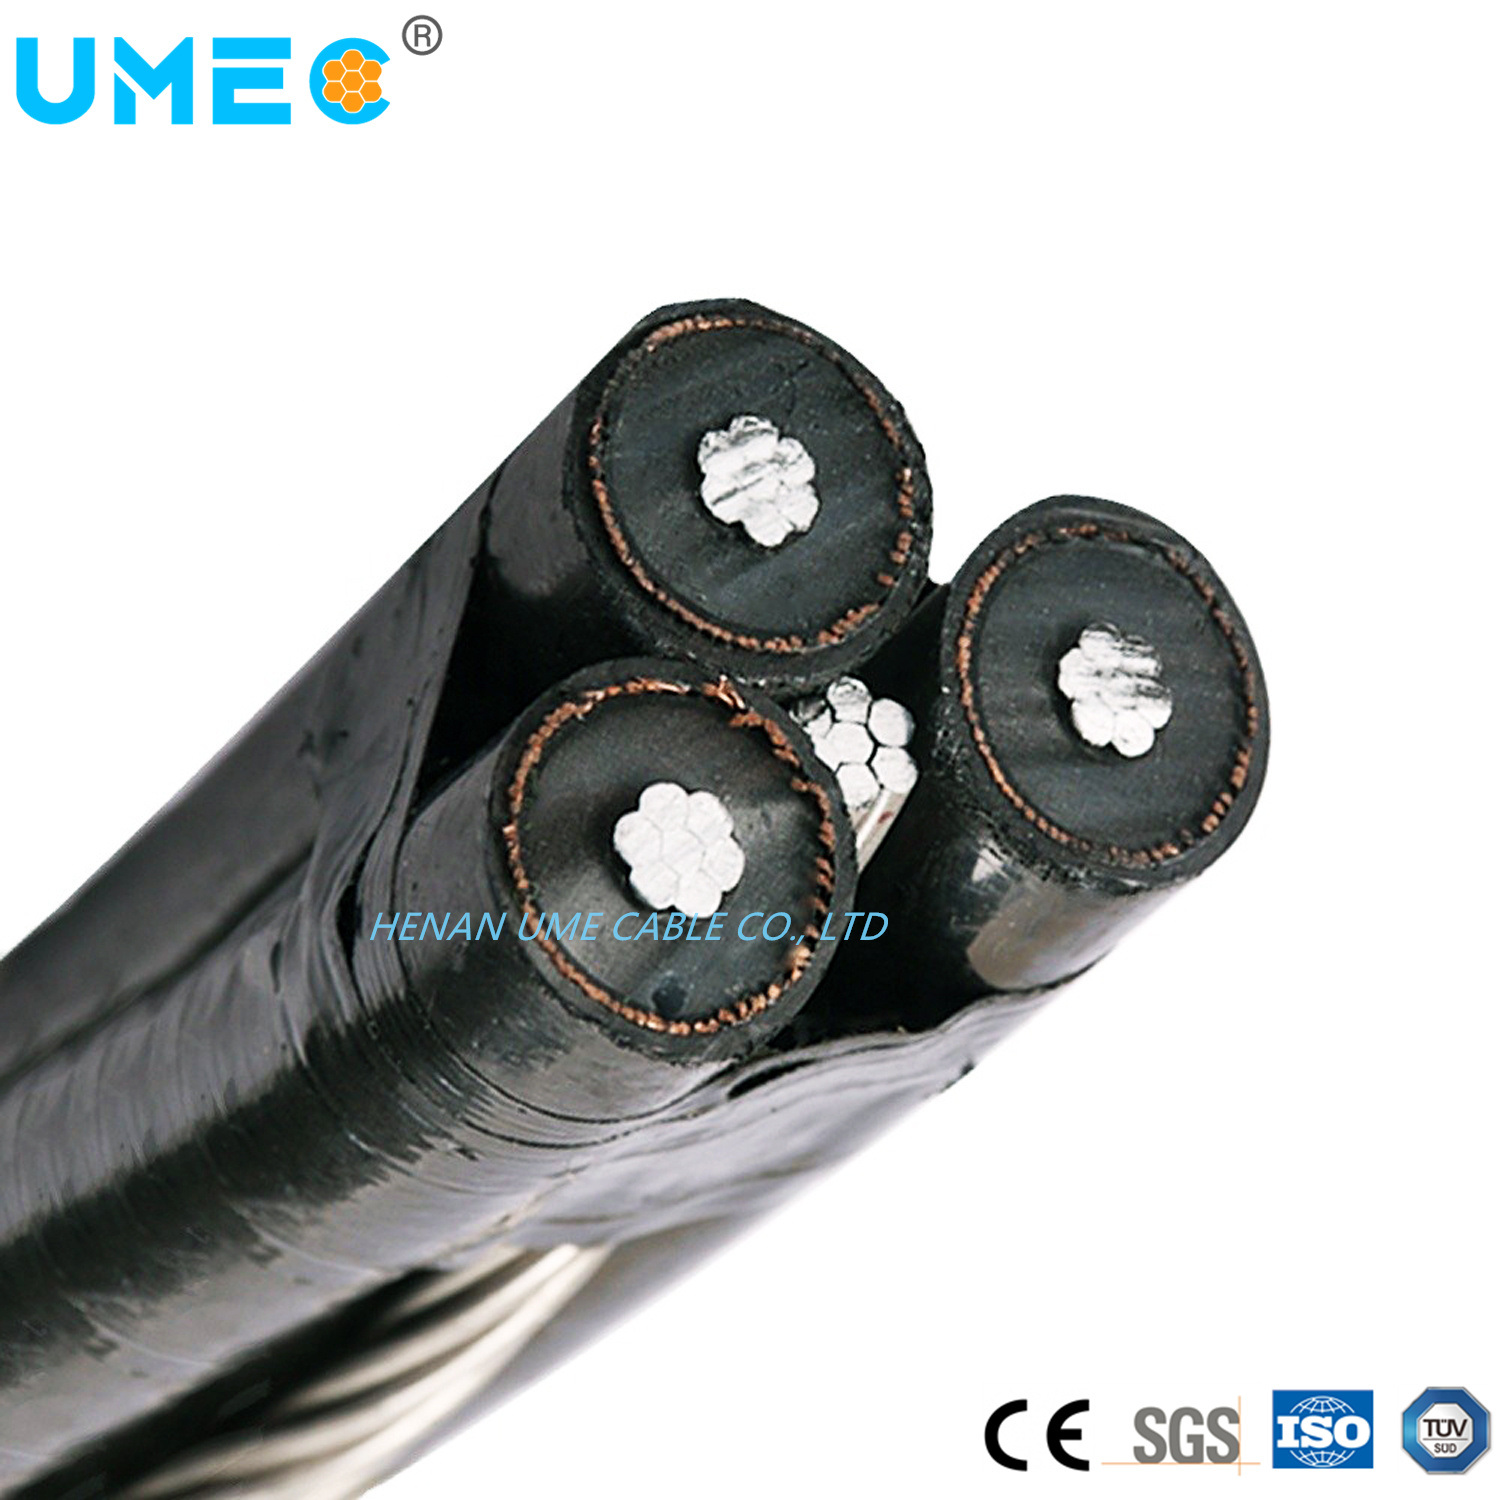 Overhead Medium Voltage Aerial Bundled Cable 2/3/4/5 Cores ABC Cable